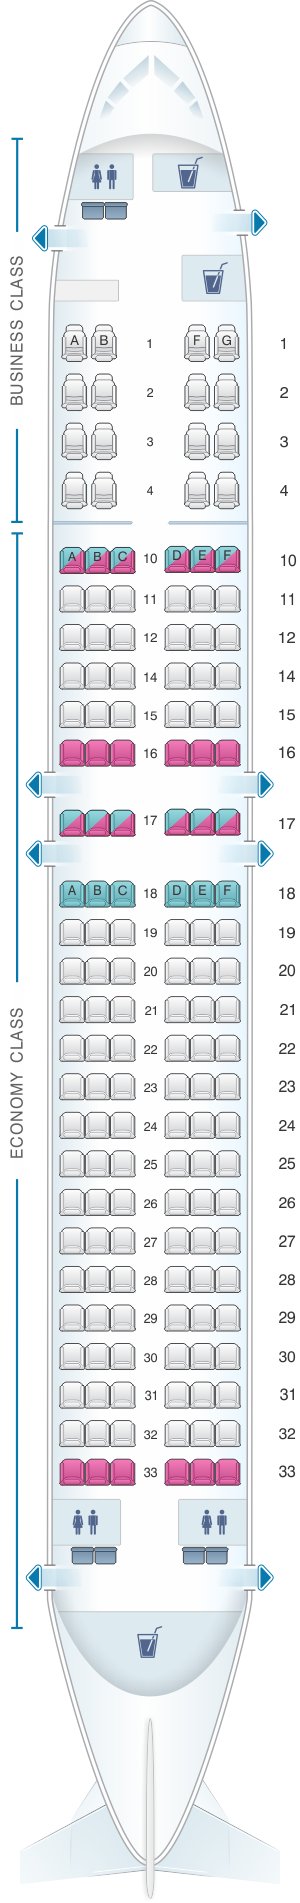 Seat map for Transaero Airlines Boeing B737 800 Config. 2